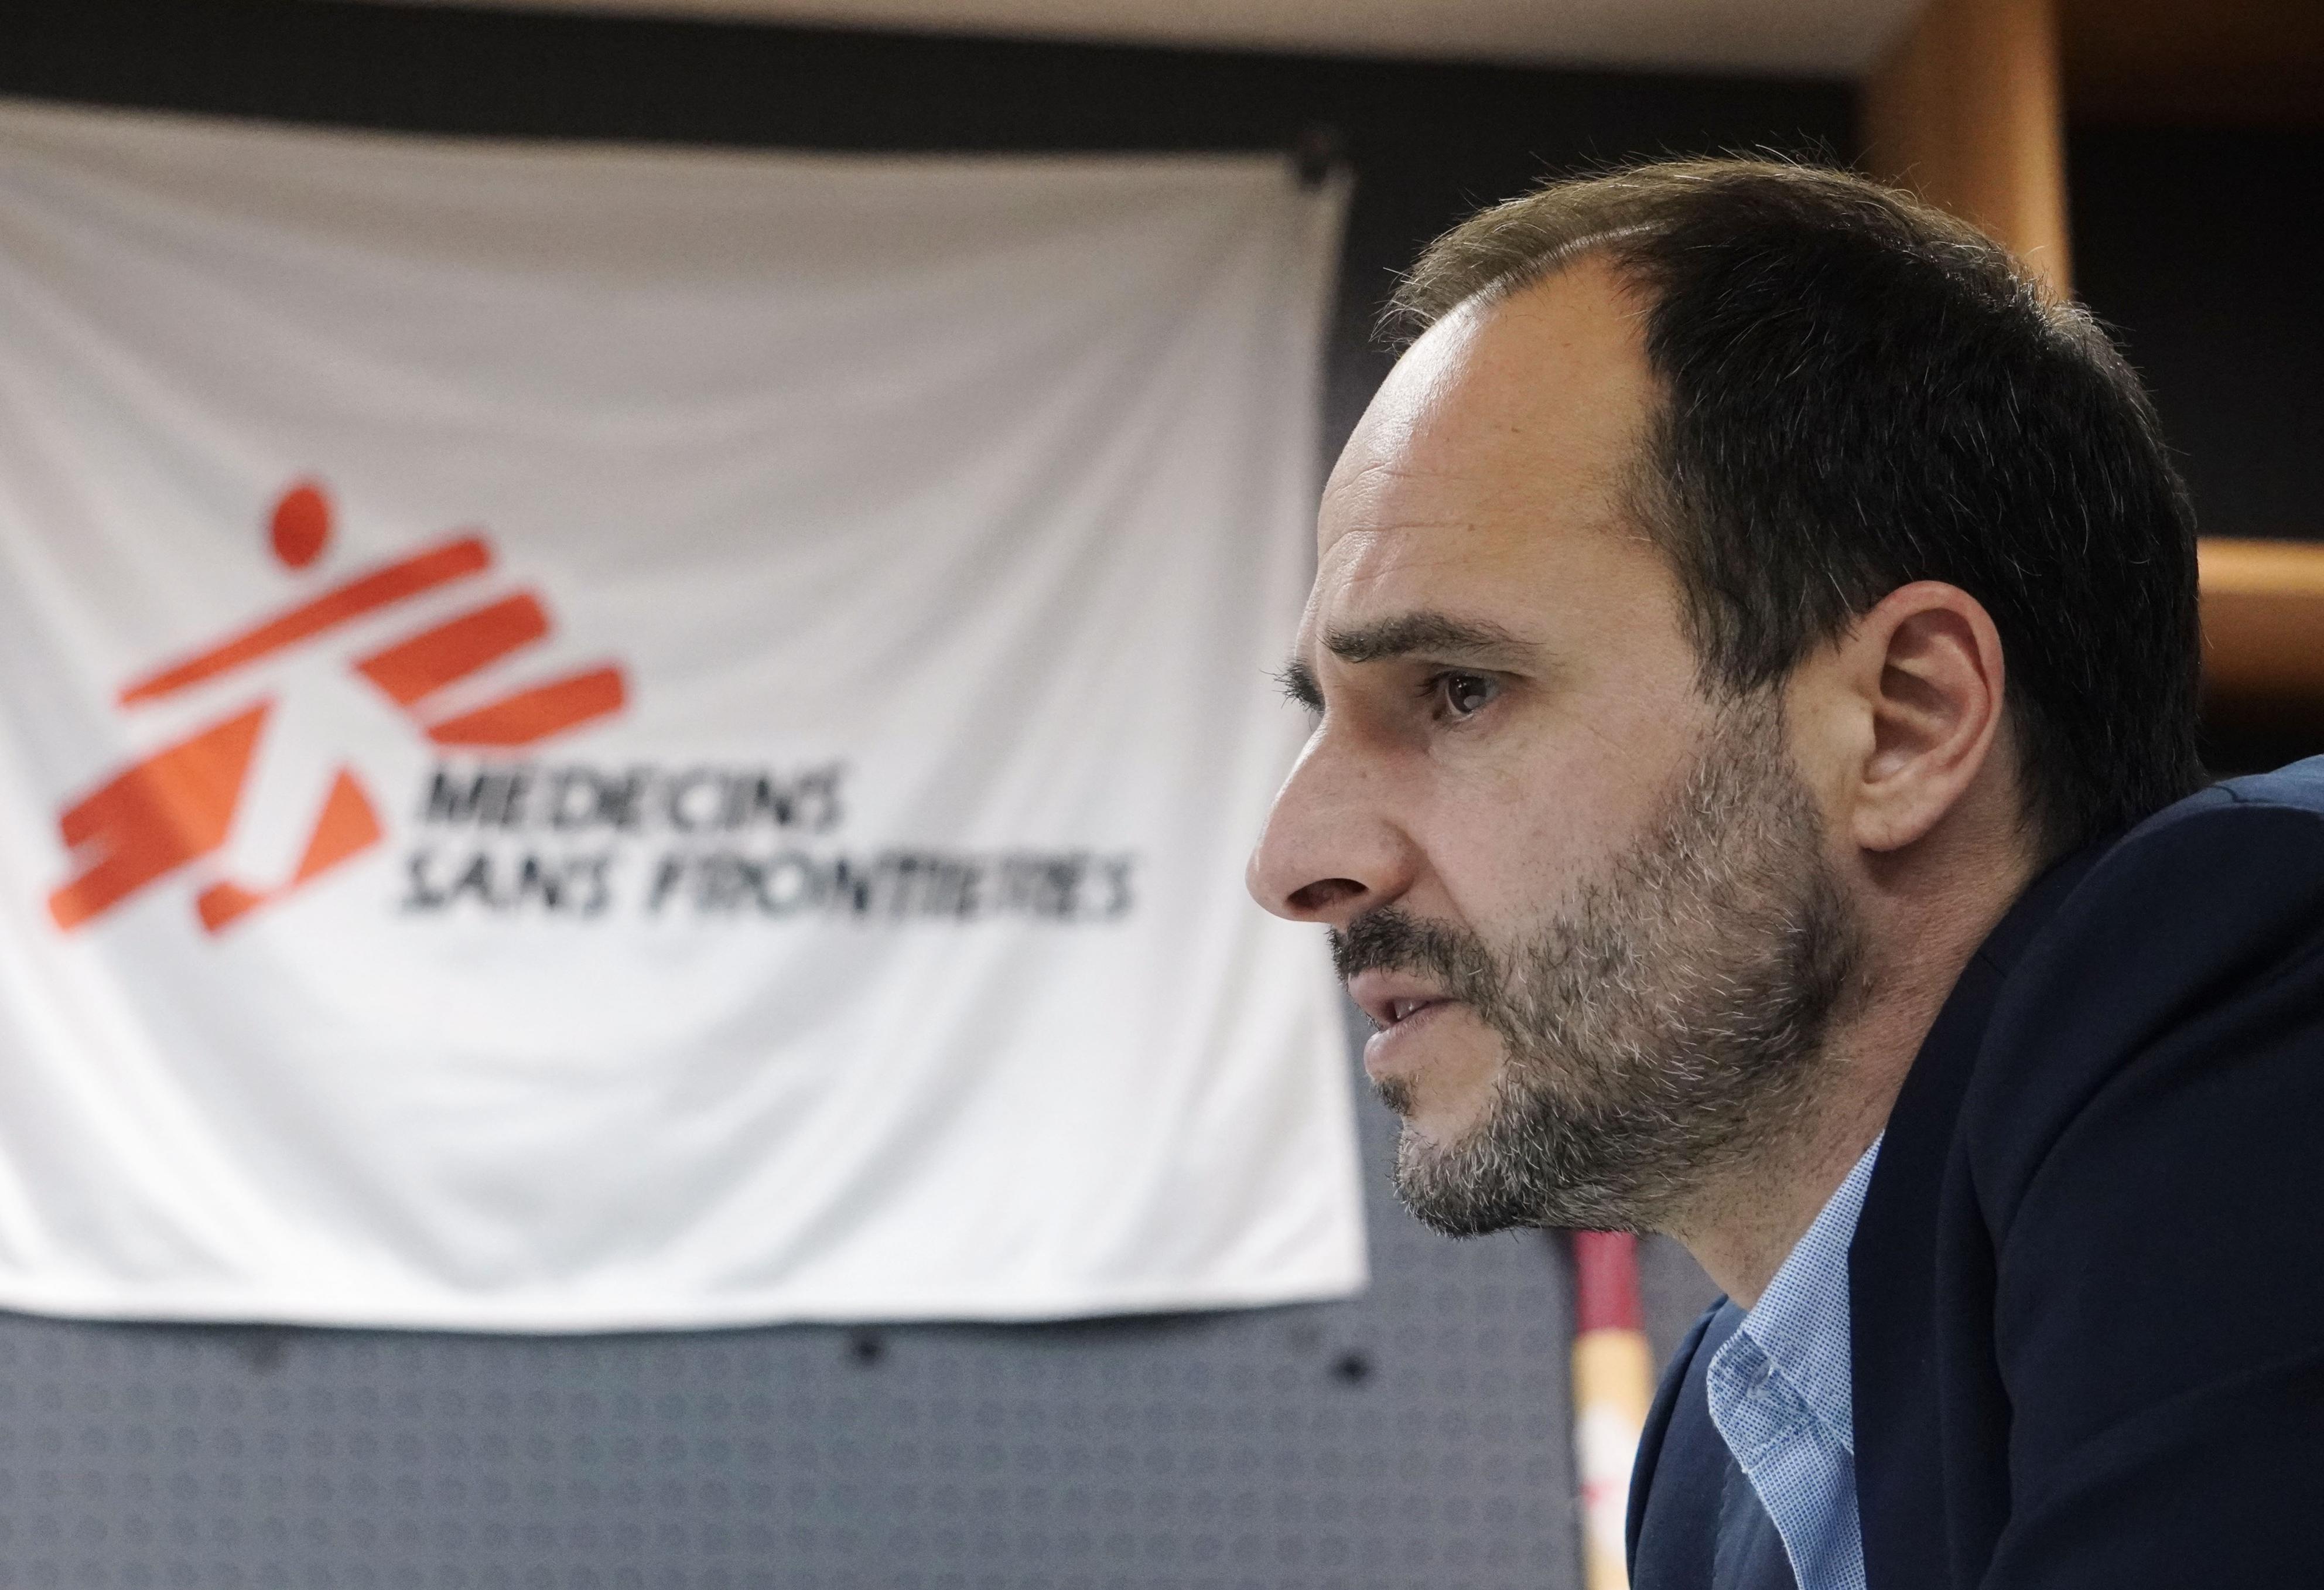 Christos Christou, international president of the medical humanitarian aid organization Doctors Without Borders, known by its French acronym MSF (Medecins Sans Frontieres), speaks during an interview in Tokyo, Japan, on June 26, 2023.